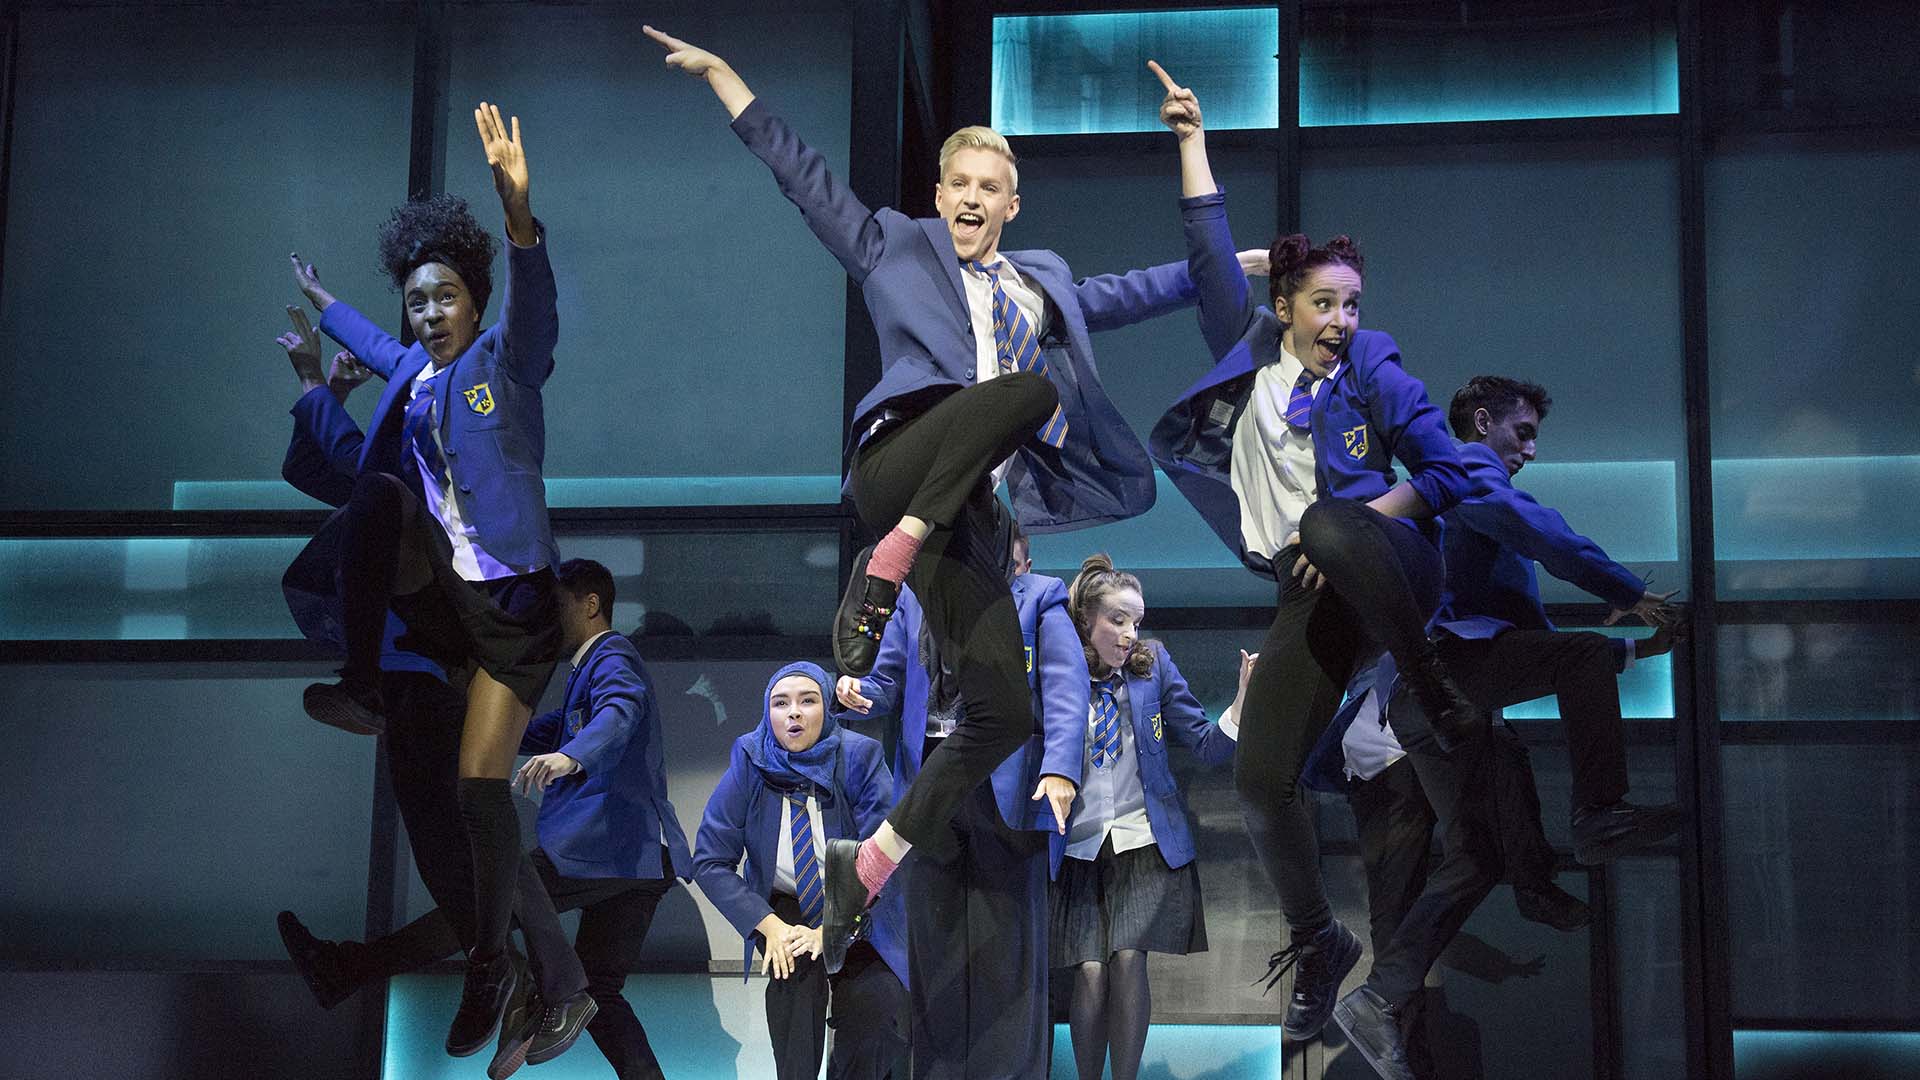 Acclaimed West End Musical 'Everybody's Talking About Jamie' Is Coming to Australia